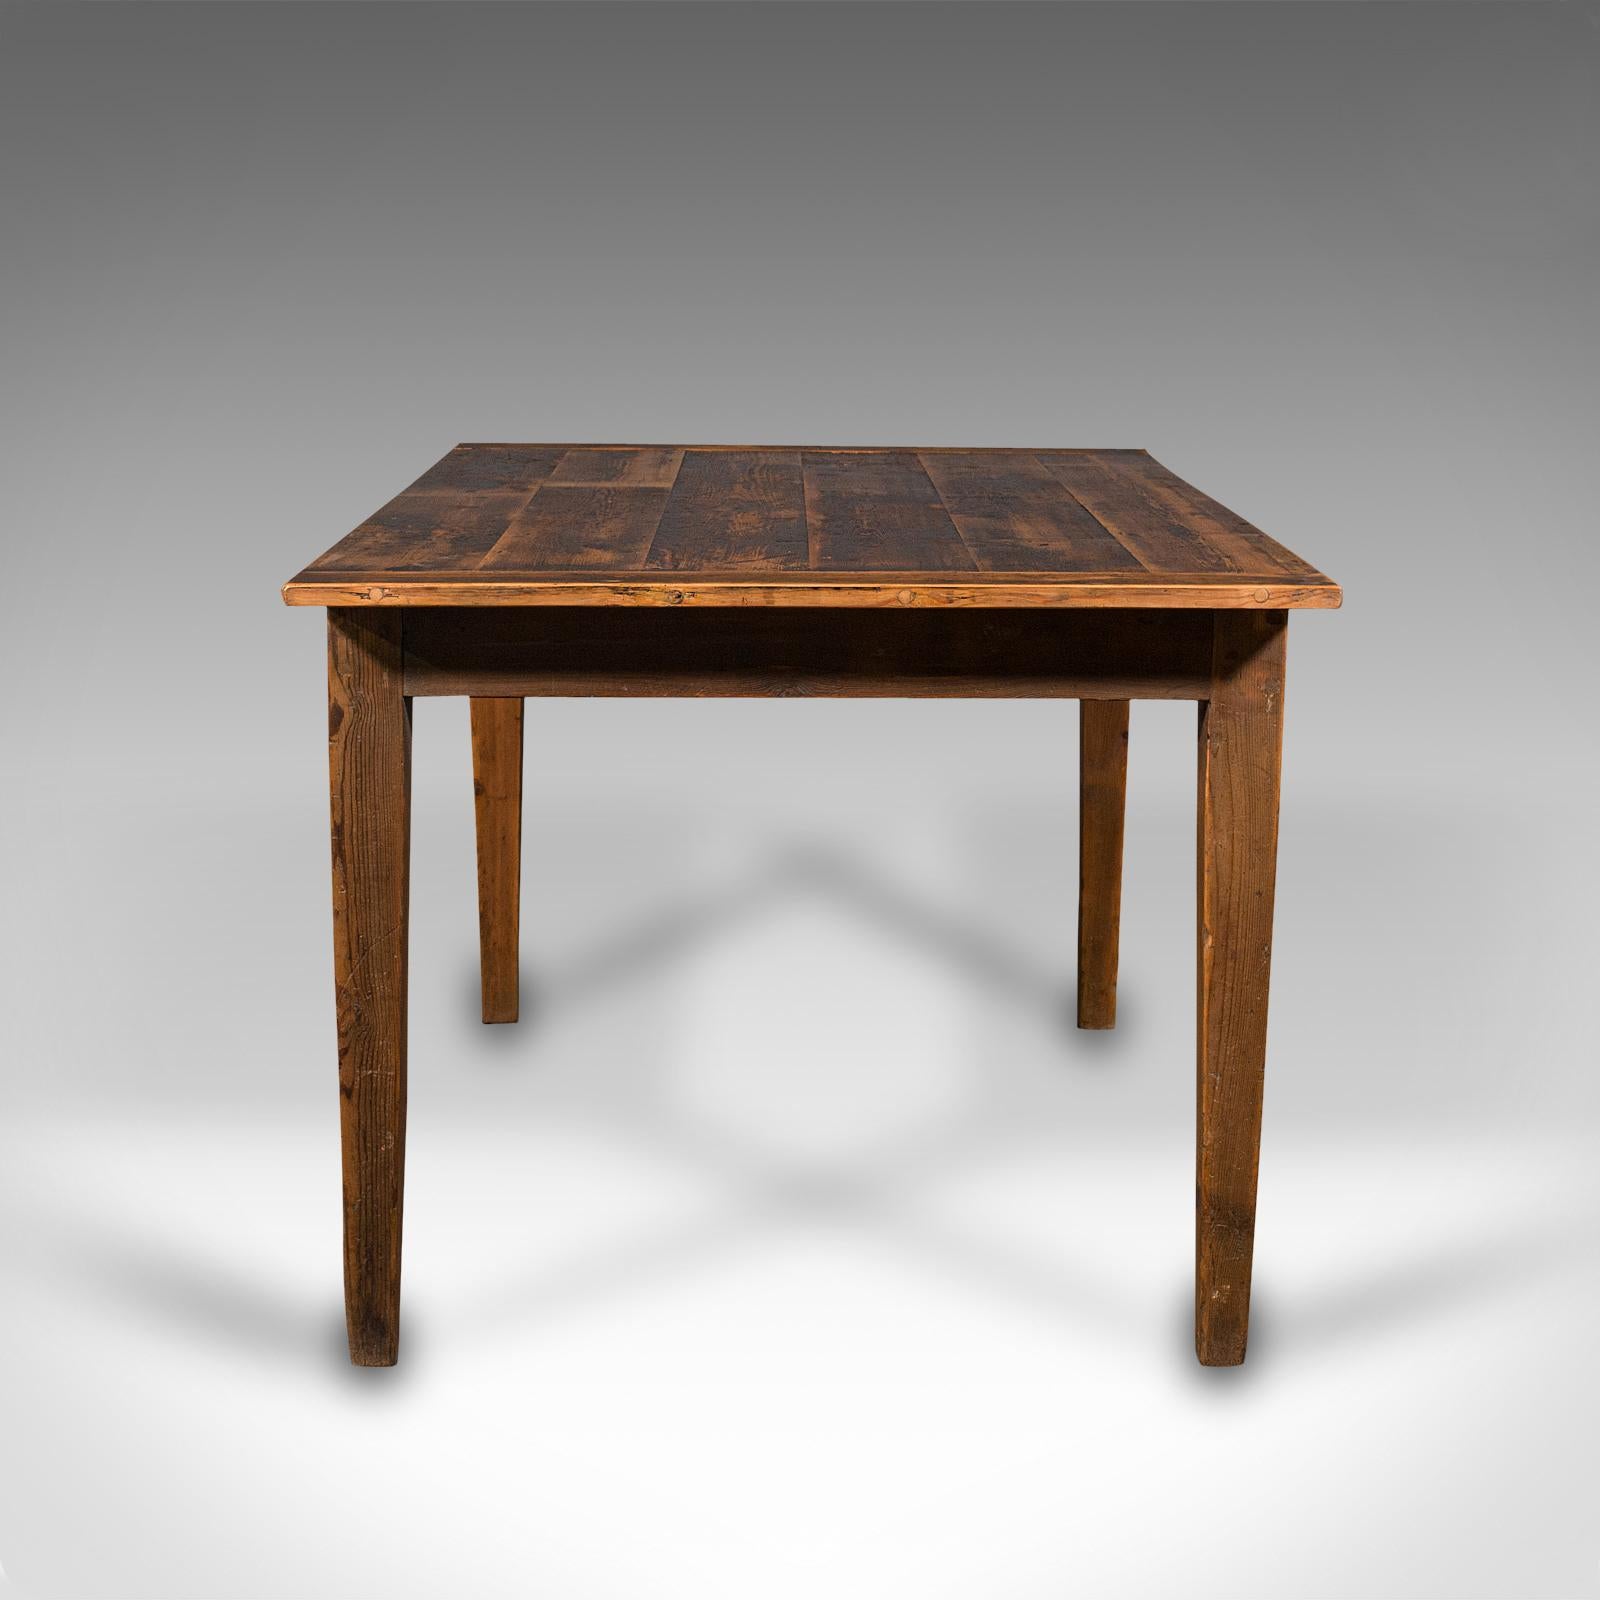 British Antique Farmhouse Kitchen Table, English Pine, Country Dining, Victorian, C.1900